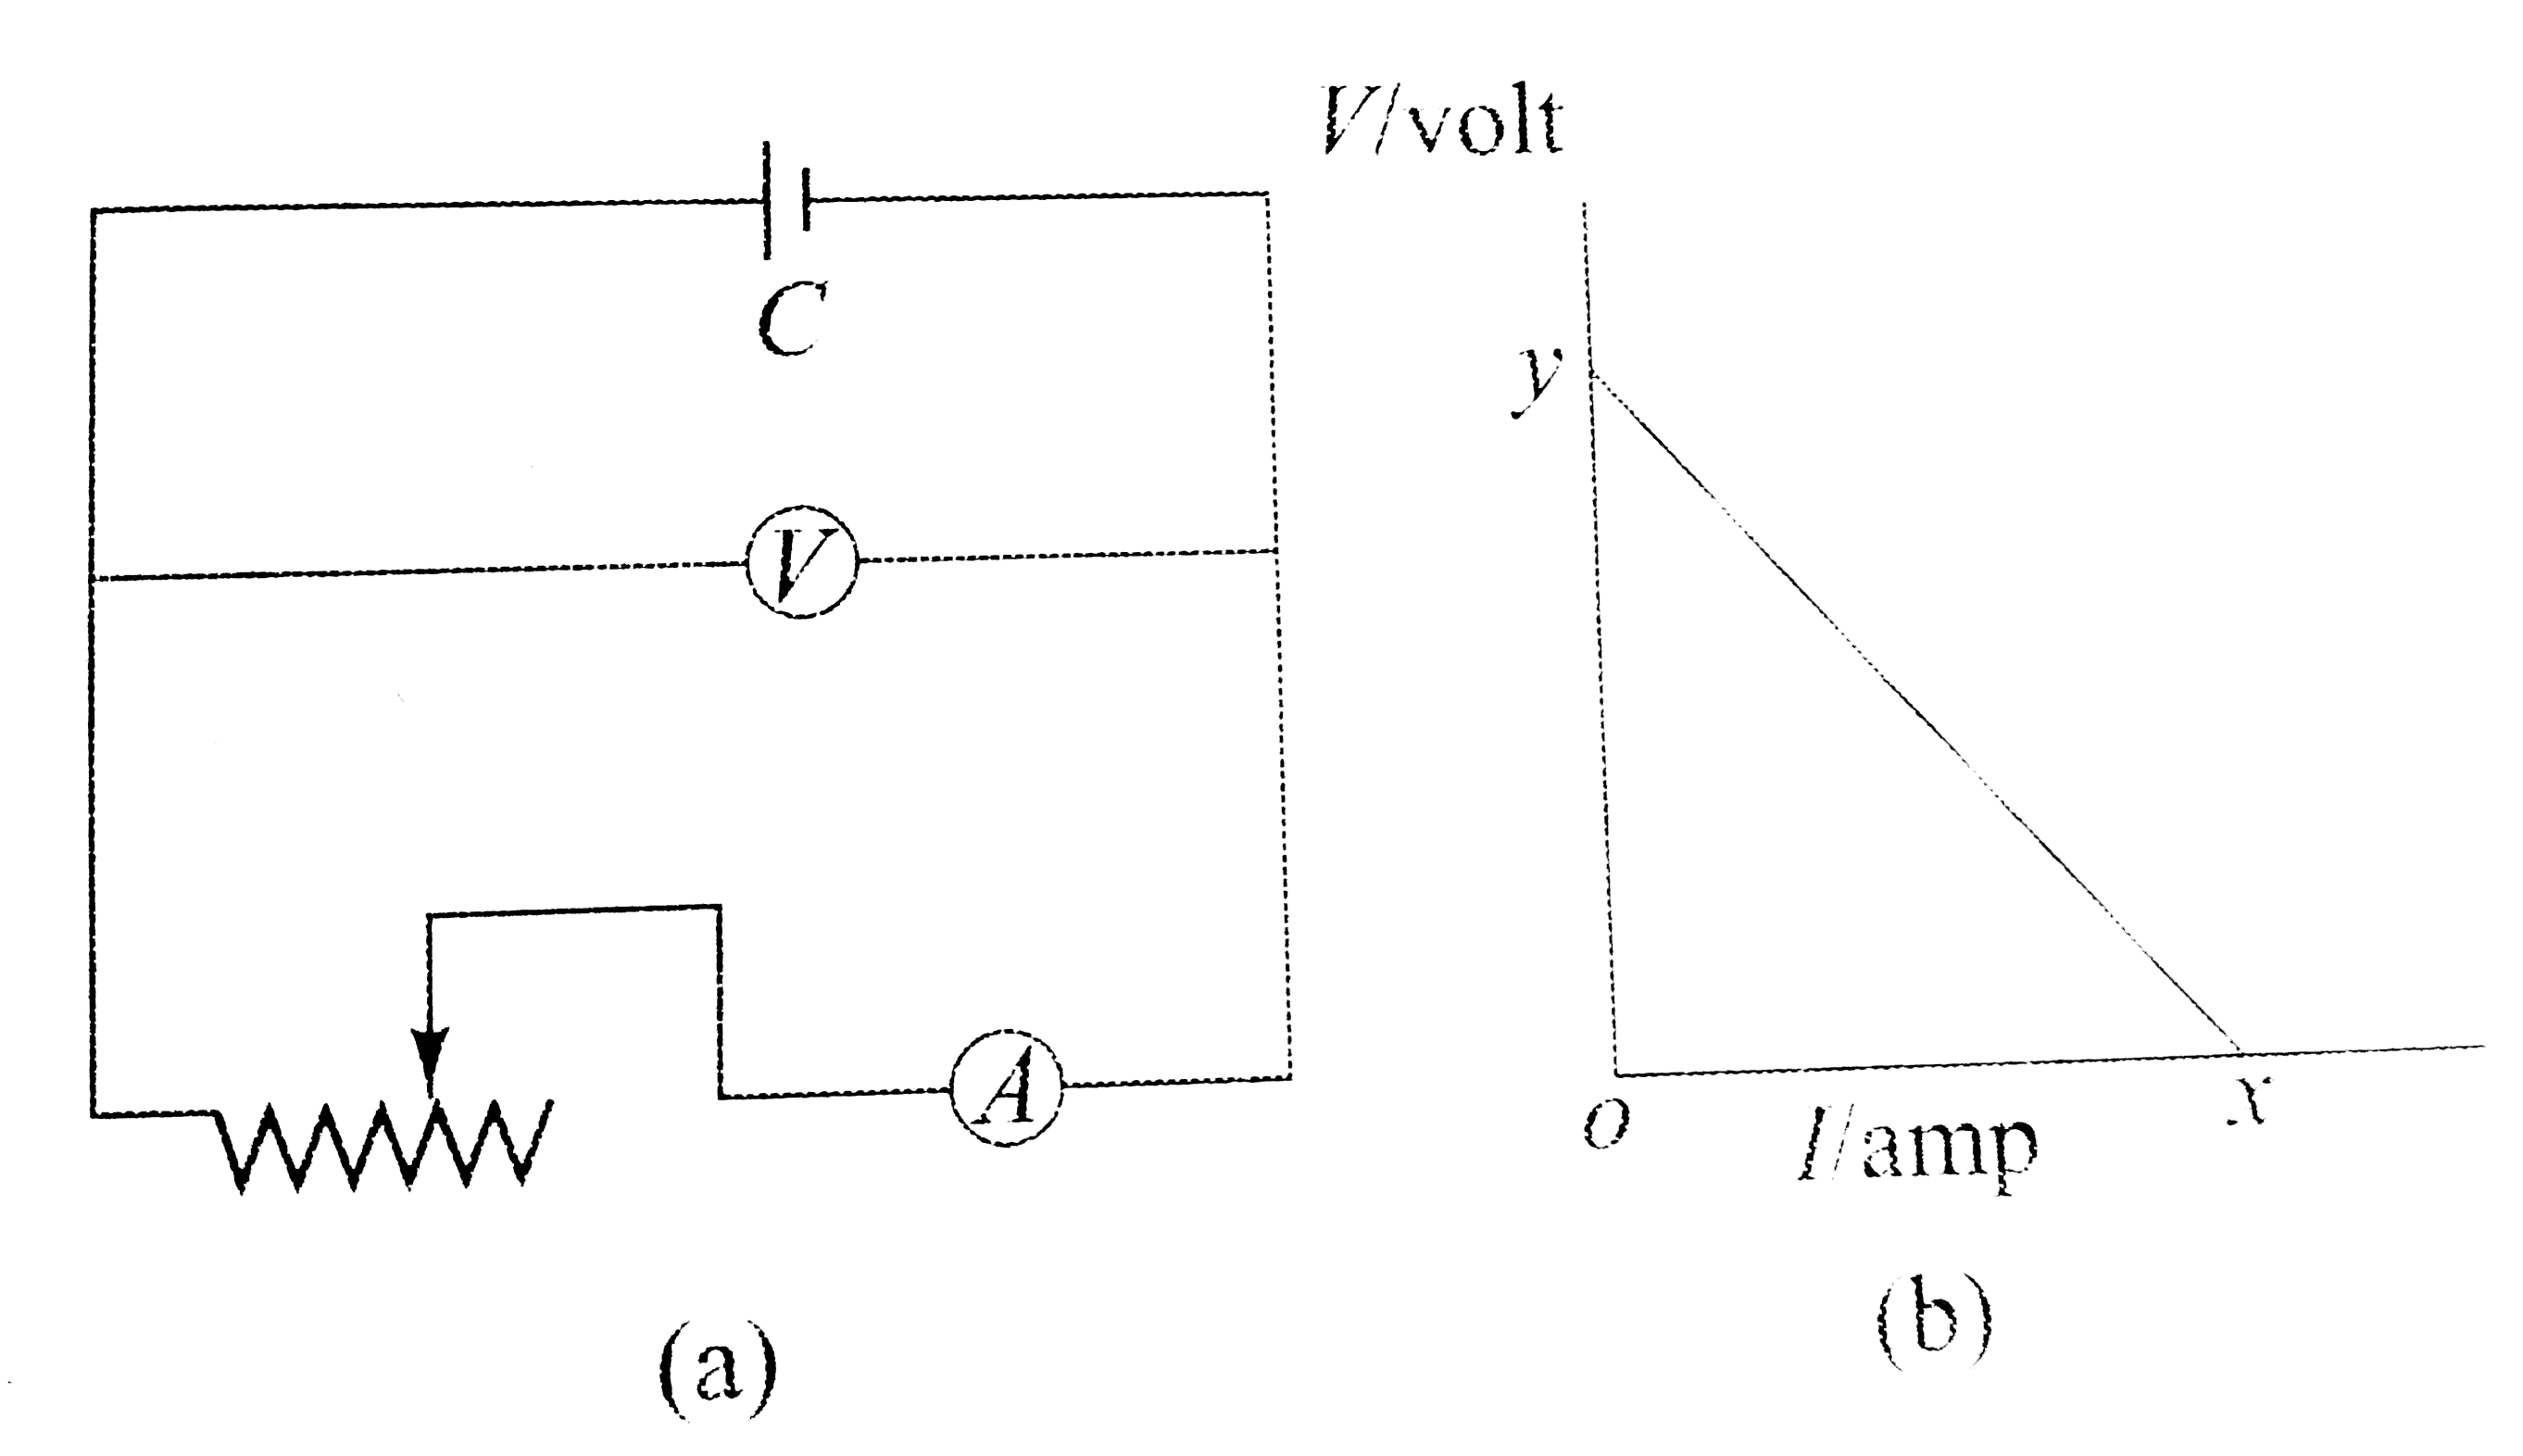 shows a circuit used in an experiment to determine the emf and internal resistance of the battery C. A graph was plotted of the potential difference V between the terminals of the battery against the current I, which was varied by adjusting the rheostat. The graph is shown in x and y are the intercepts of the graph with the axes as shown. What is the internal resistance of the battery?